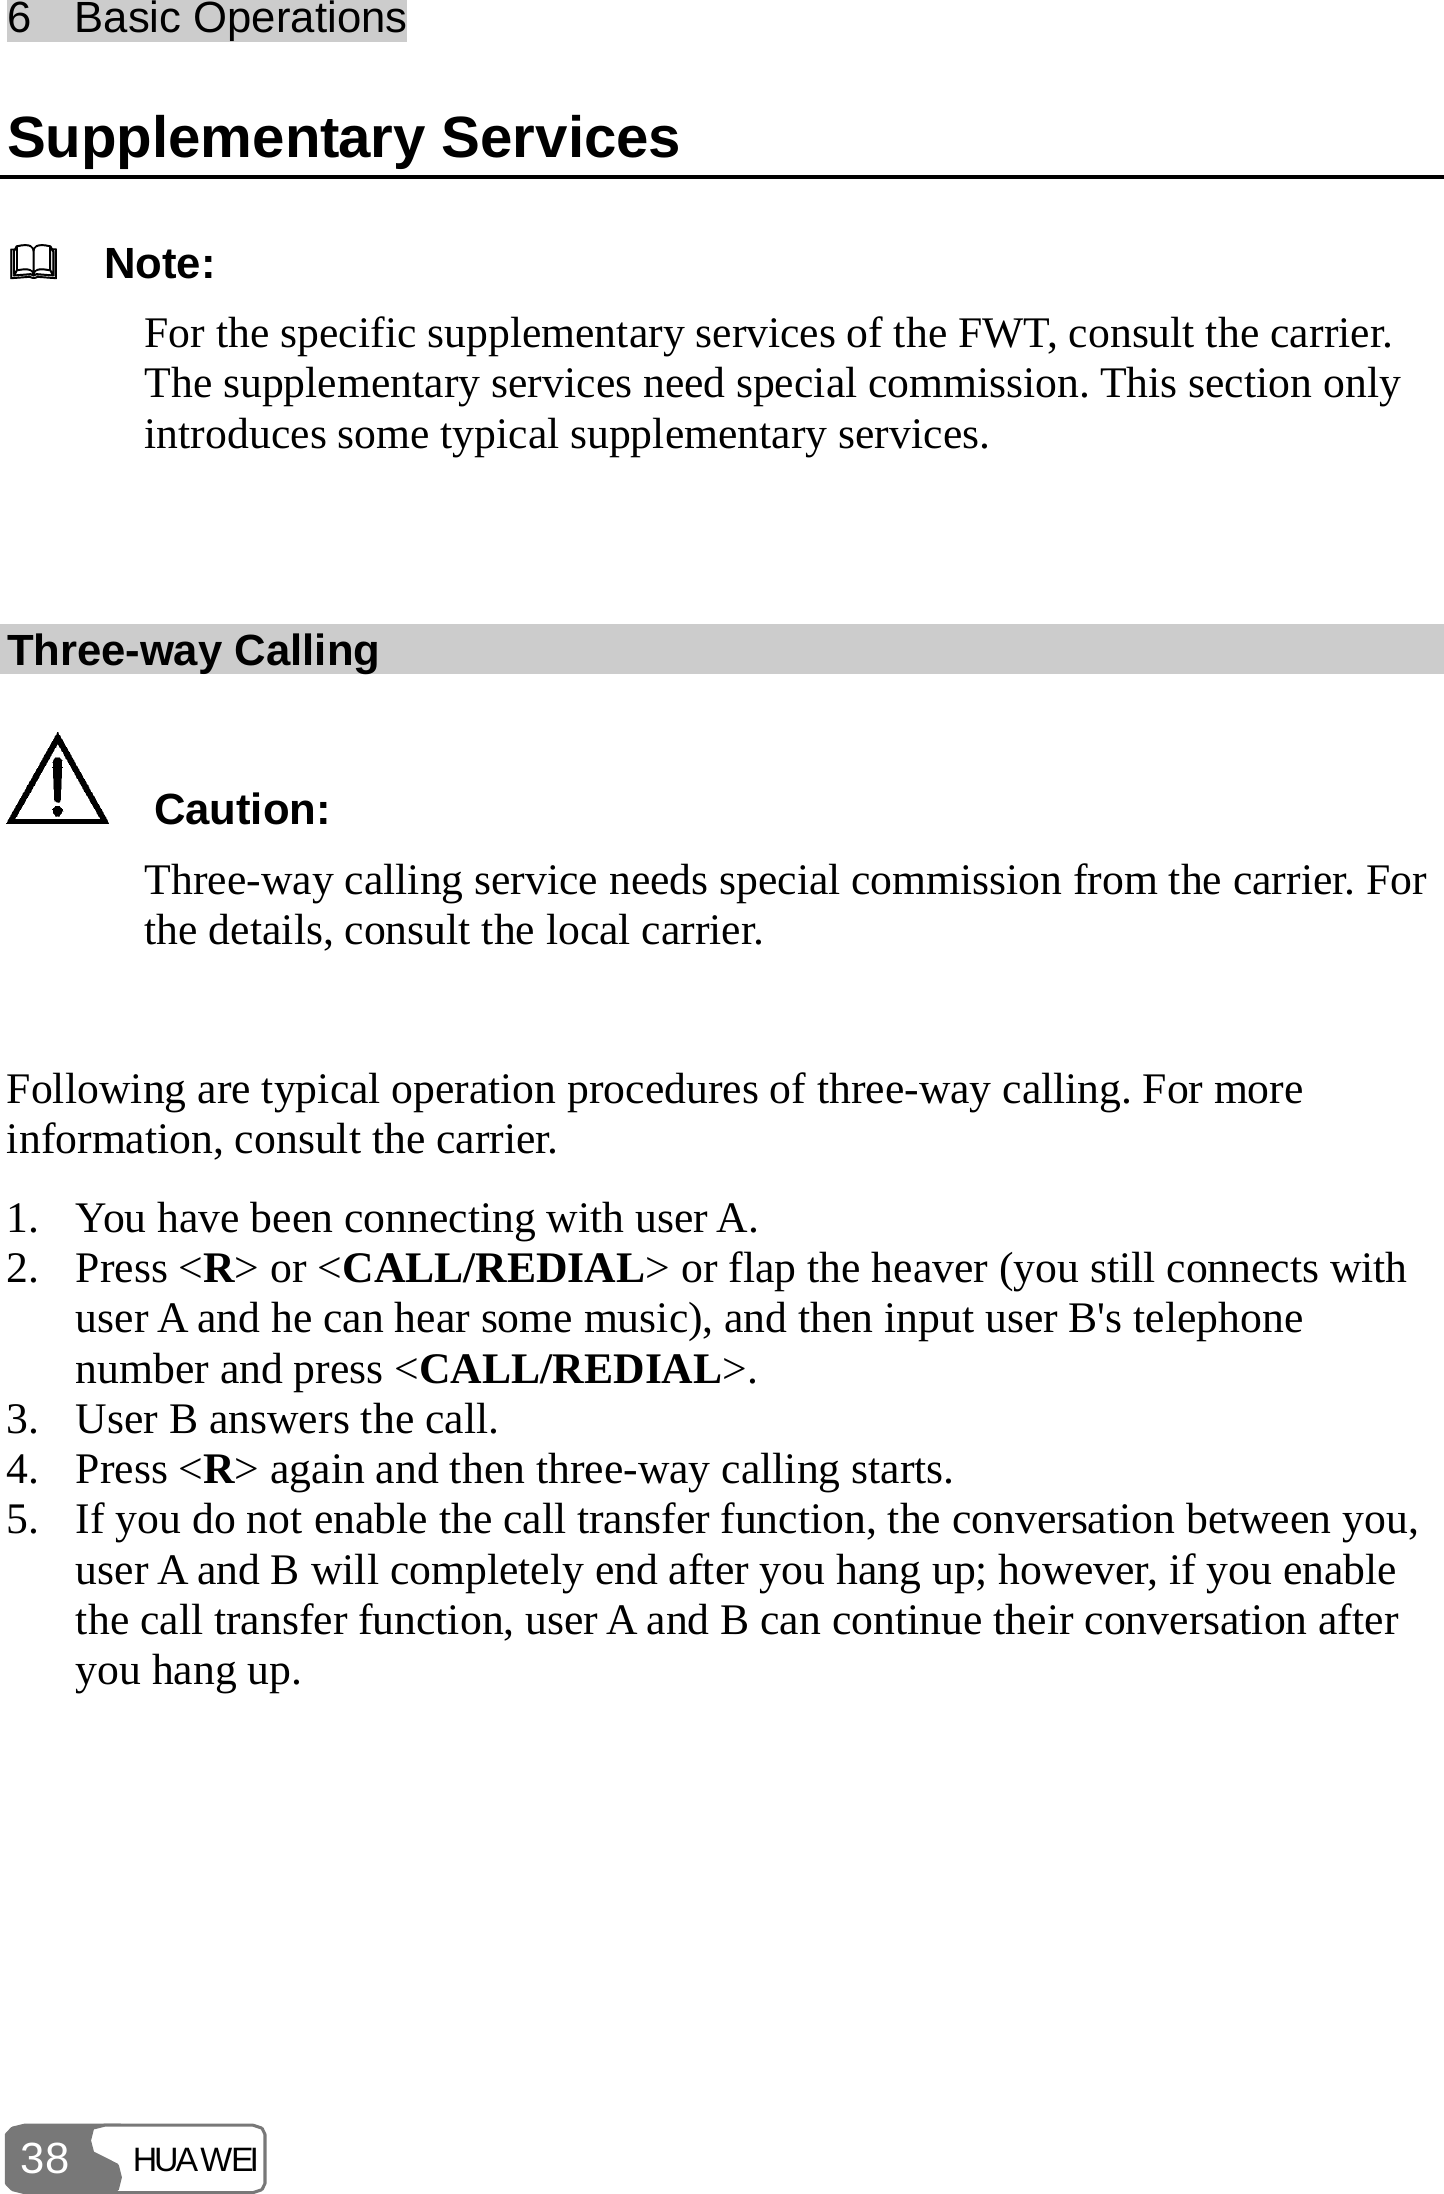 6  Basic Operations HUAWEI 38 Supplementary Services   Note: For the specific supplementary services of the FWT, consult the carrier. The supplementary services need special commission. This section only introduces some typical supplementary services.  Three-way Calling   Caution: Three-way calling service needs special commission from the carrier. For the details, consult the local carrier.  Following are typical operation procedures of three-way calling. For more information, consult the carrier. 1. You have been connecting with user A. 2. Press &lt;R&gt; or &lt;CALL/REDIAL&gt; or flap the heaver (you still connects with user A and he can hear some music), and then input user B&apos;s telephone number and press &lt;CALL/REDIAL&gt;. 3. User B answers the call. 4. Press &lt;R&gt; again and then three-way calling starts. 5. If you do not enable the call transfer function, the conversation between you, user A and B will completely end after you hang up; however, if you enable the call transfer function, user A and B can continue their conversation after you hang up. 